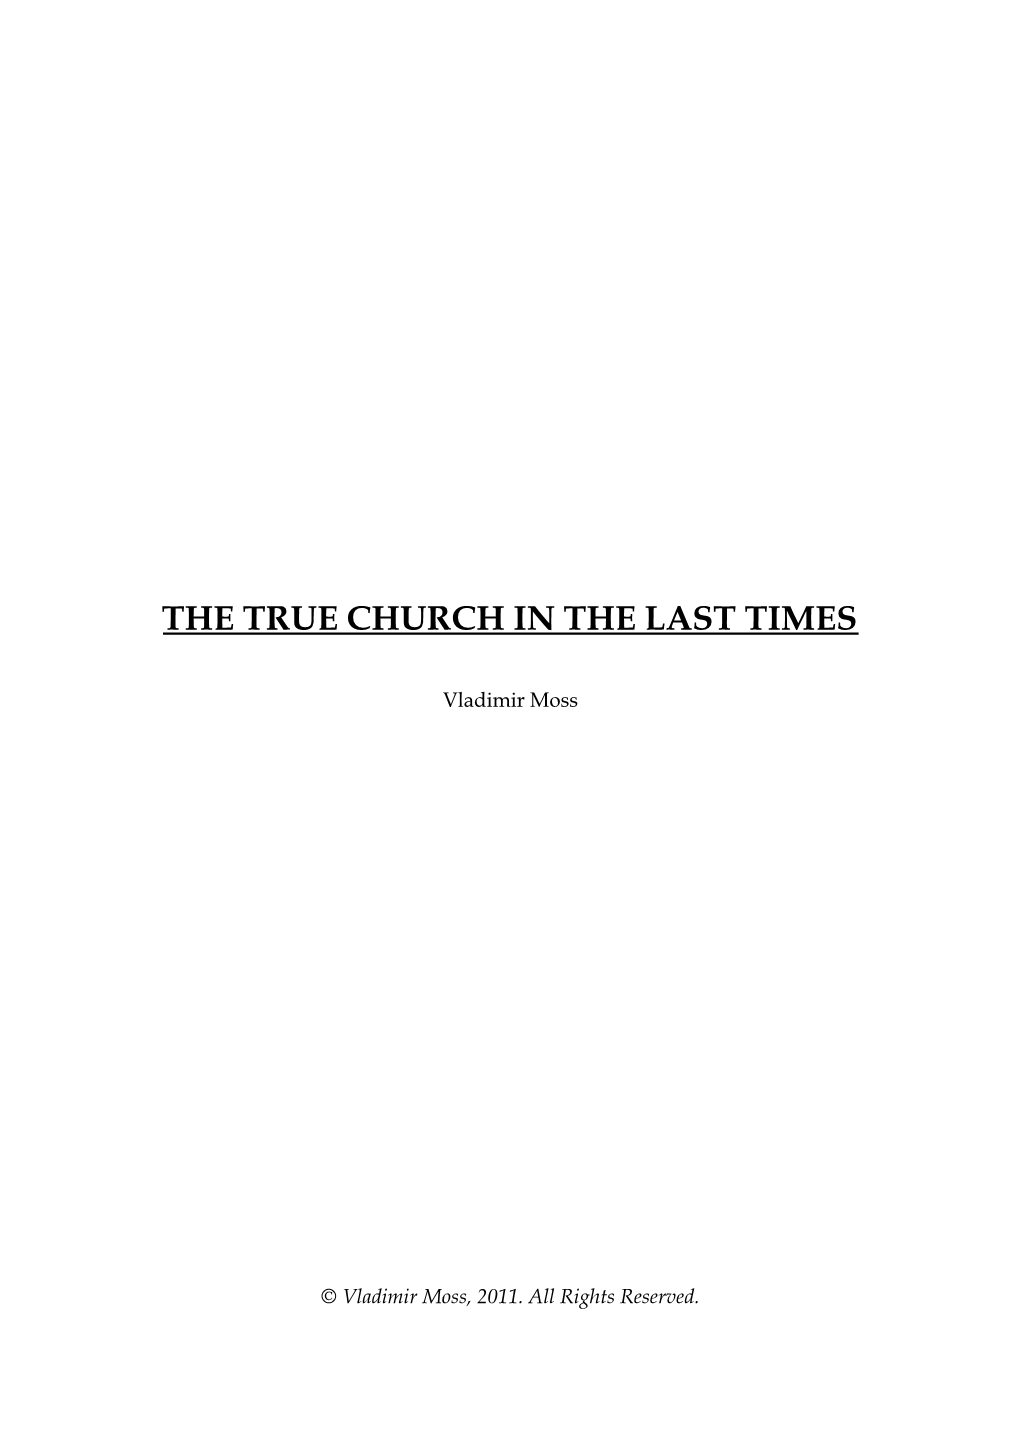 The True Church in the Last Times